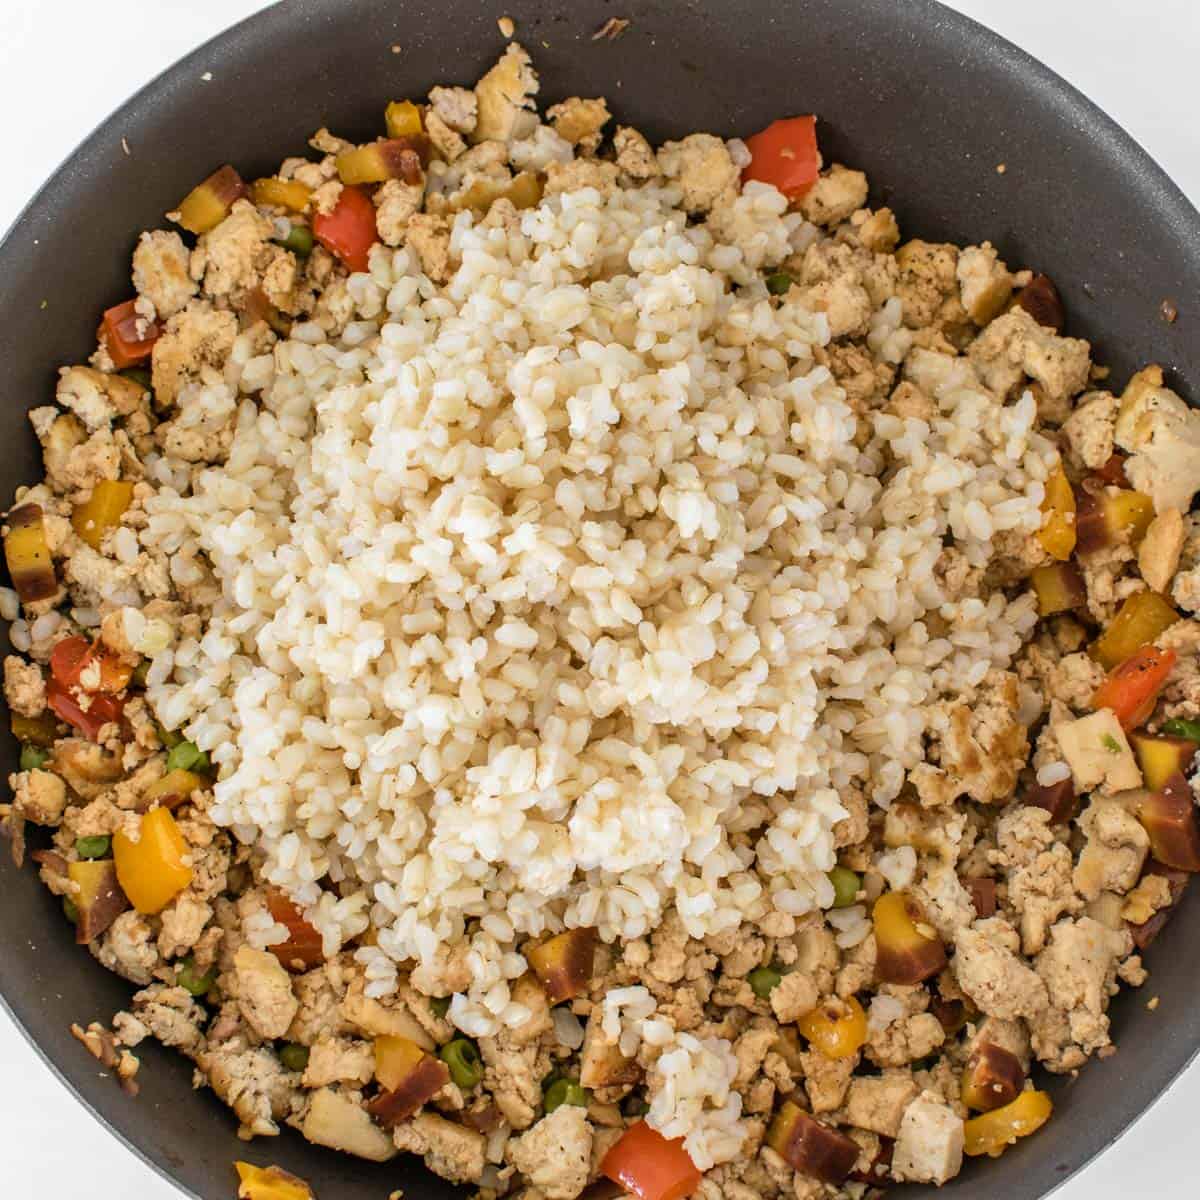 cooked brown rice folded in the pan with other ingredients.